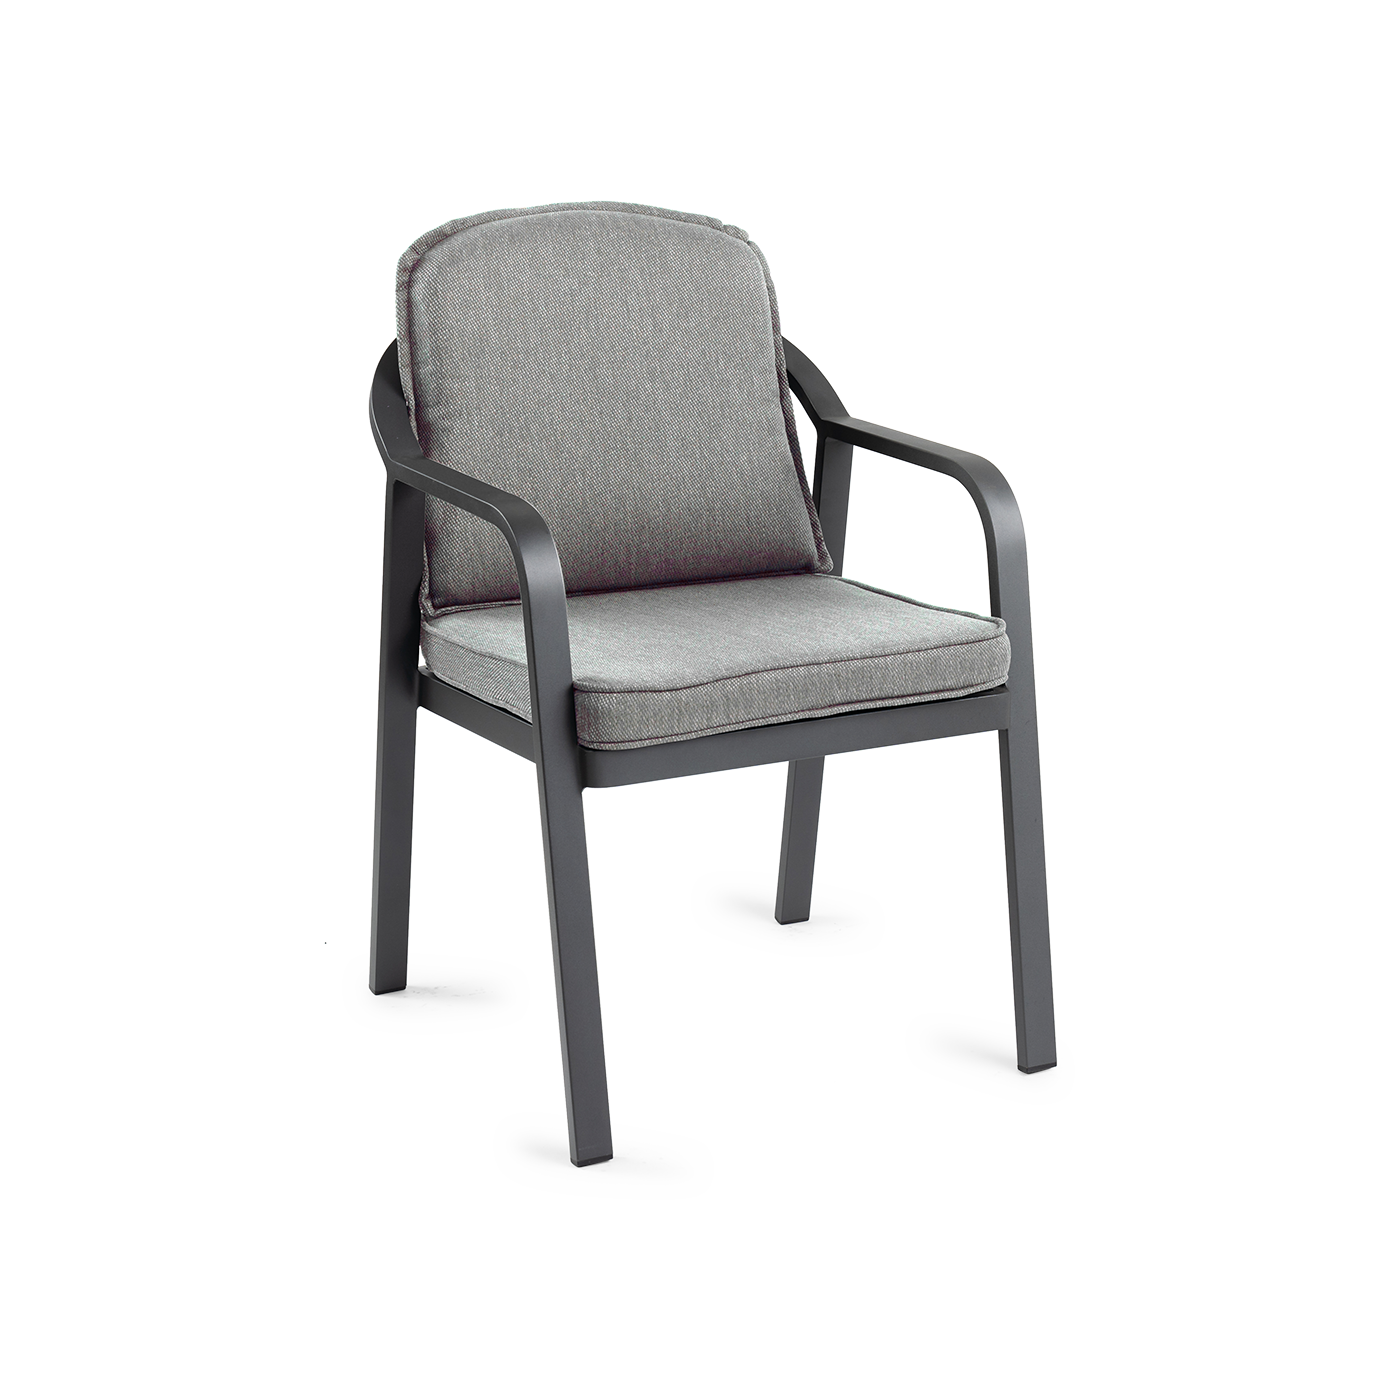 Pep Dining Chair Charcoal